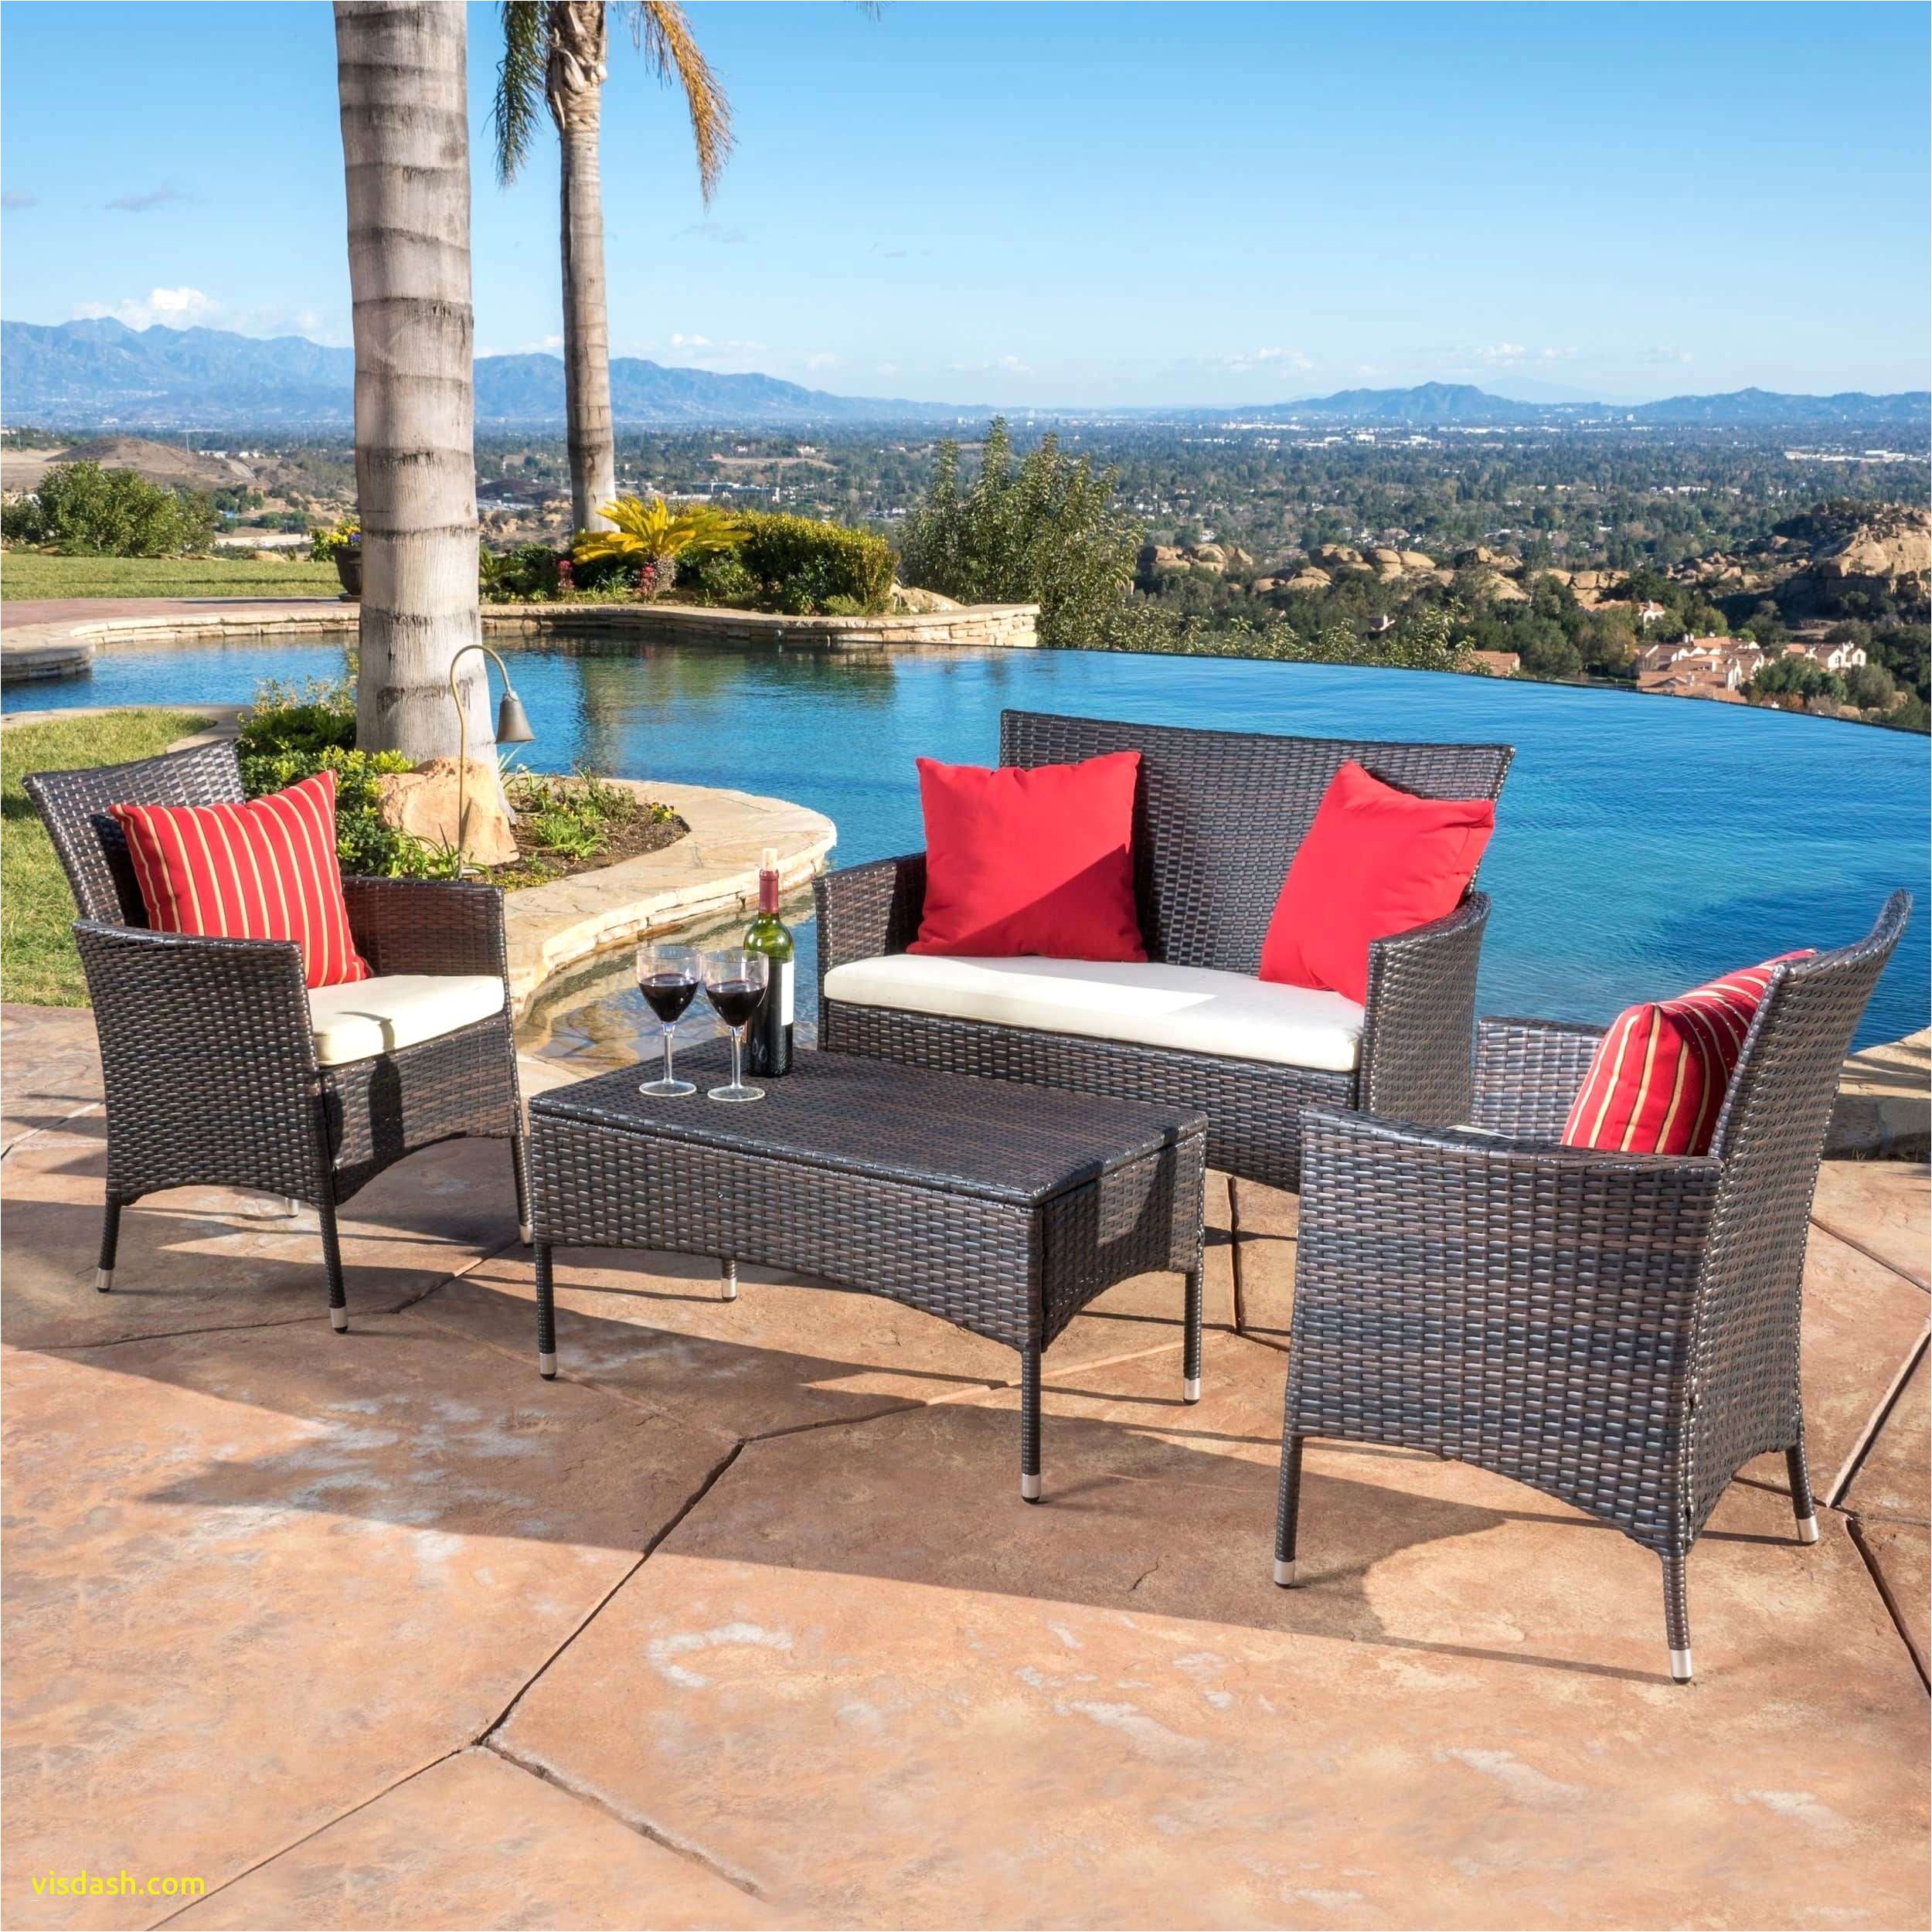 patio furniture target luxury gorgeous outdoor furniture tar bomelconsult